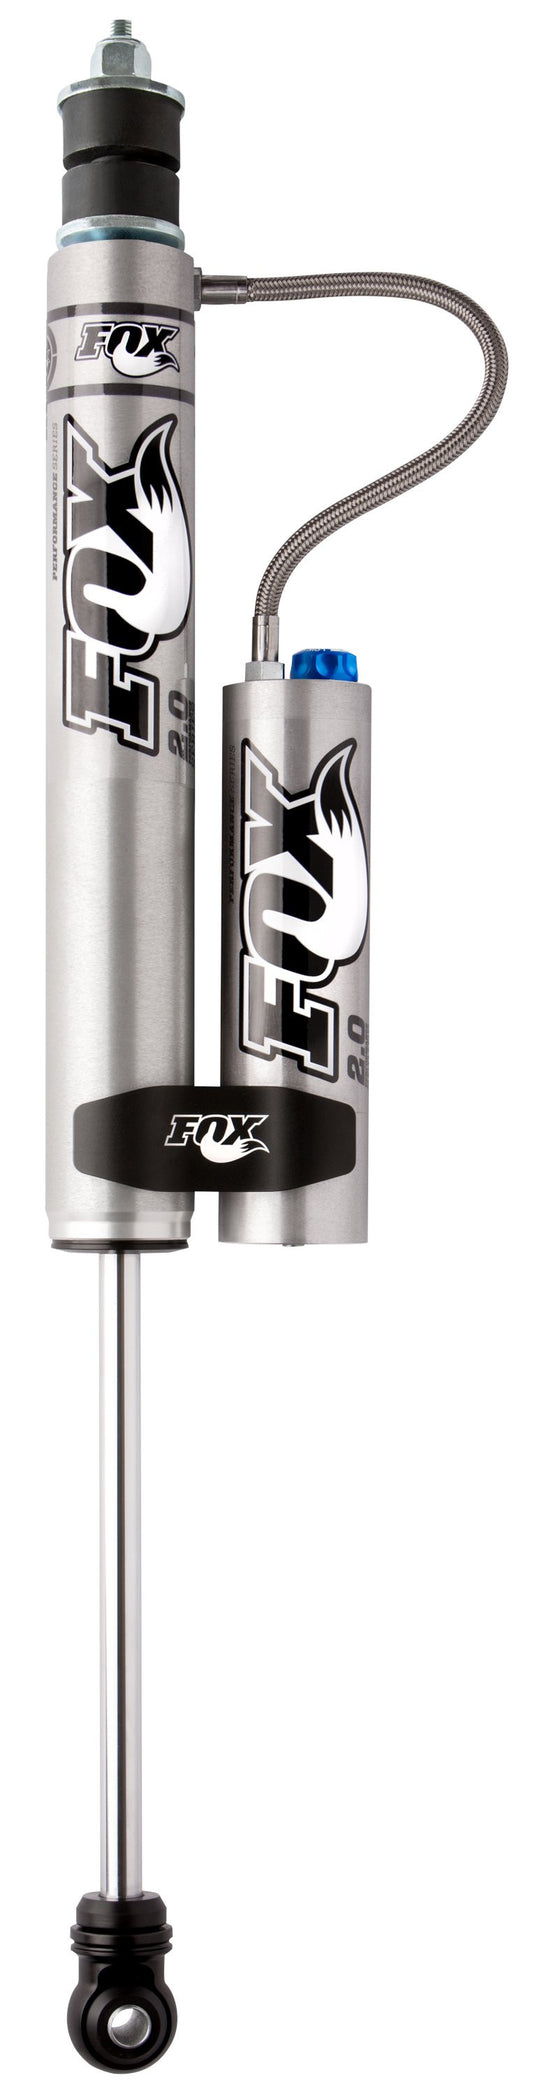 PERFORMANCE SERIES 2.0 SMOOTH BODY RESERVOIR SHOCK - ADJUSTABLE Lift: 4.5-6.5 2005-2016 Ford F-350 Super Duty FOX-985-26-105 - 2.0 SHOCK - FOX Offroad Shocks - Texas Complete Truck Center